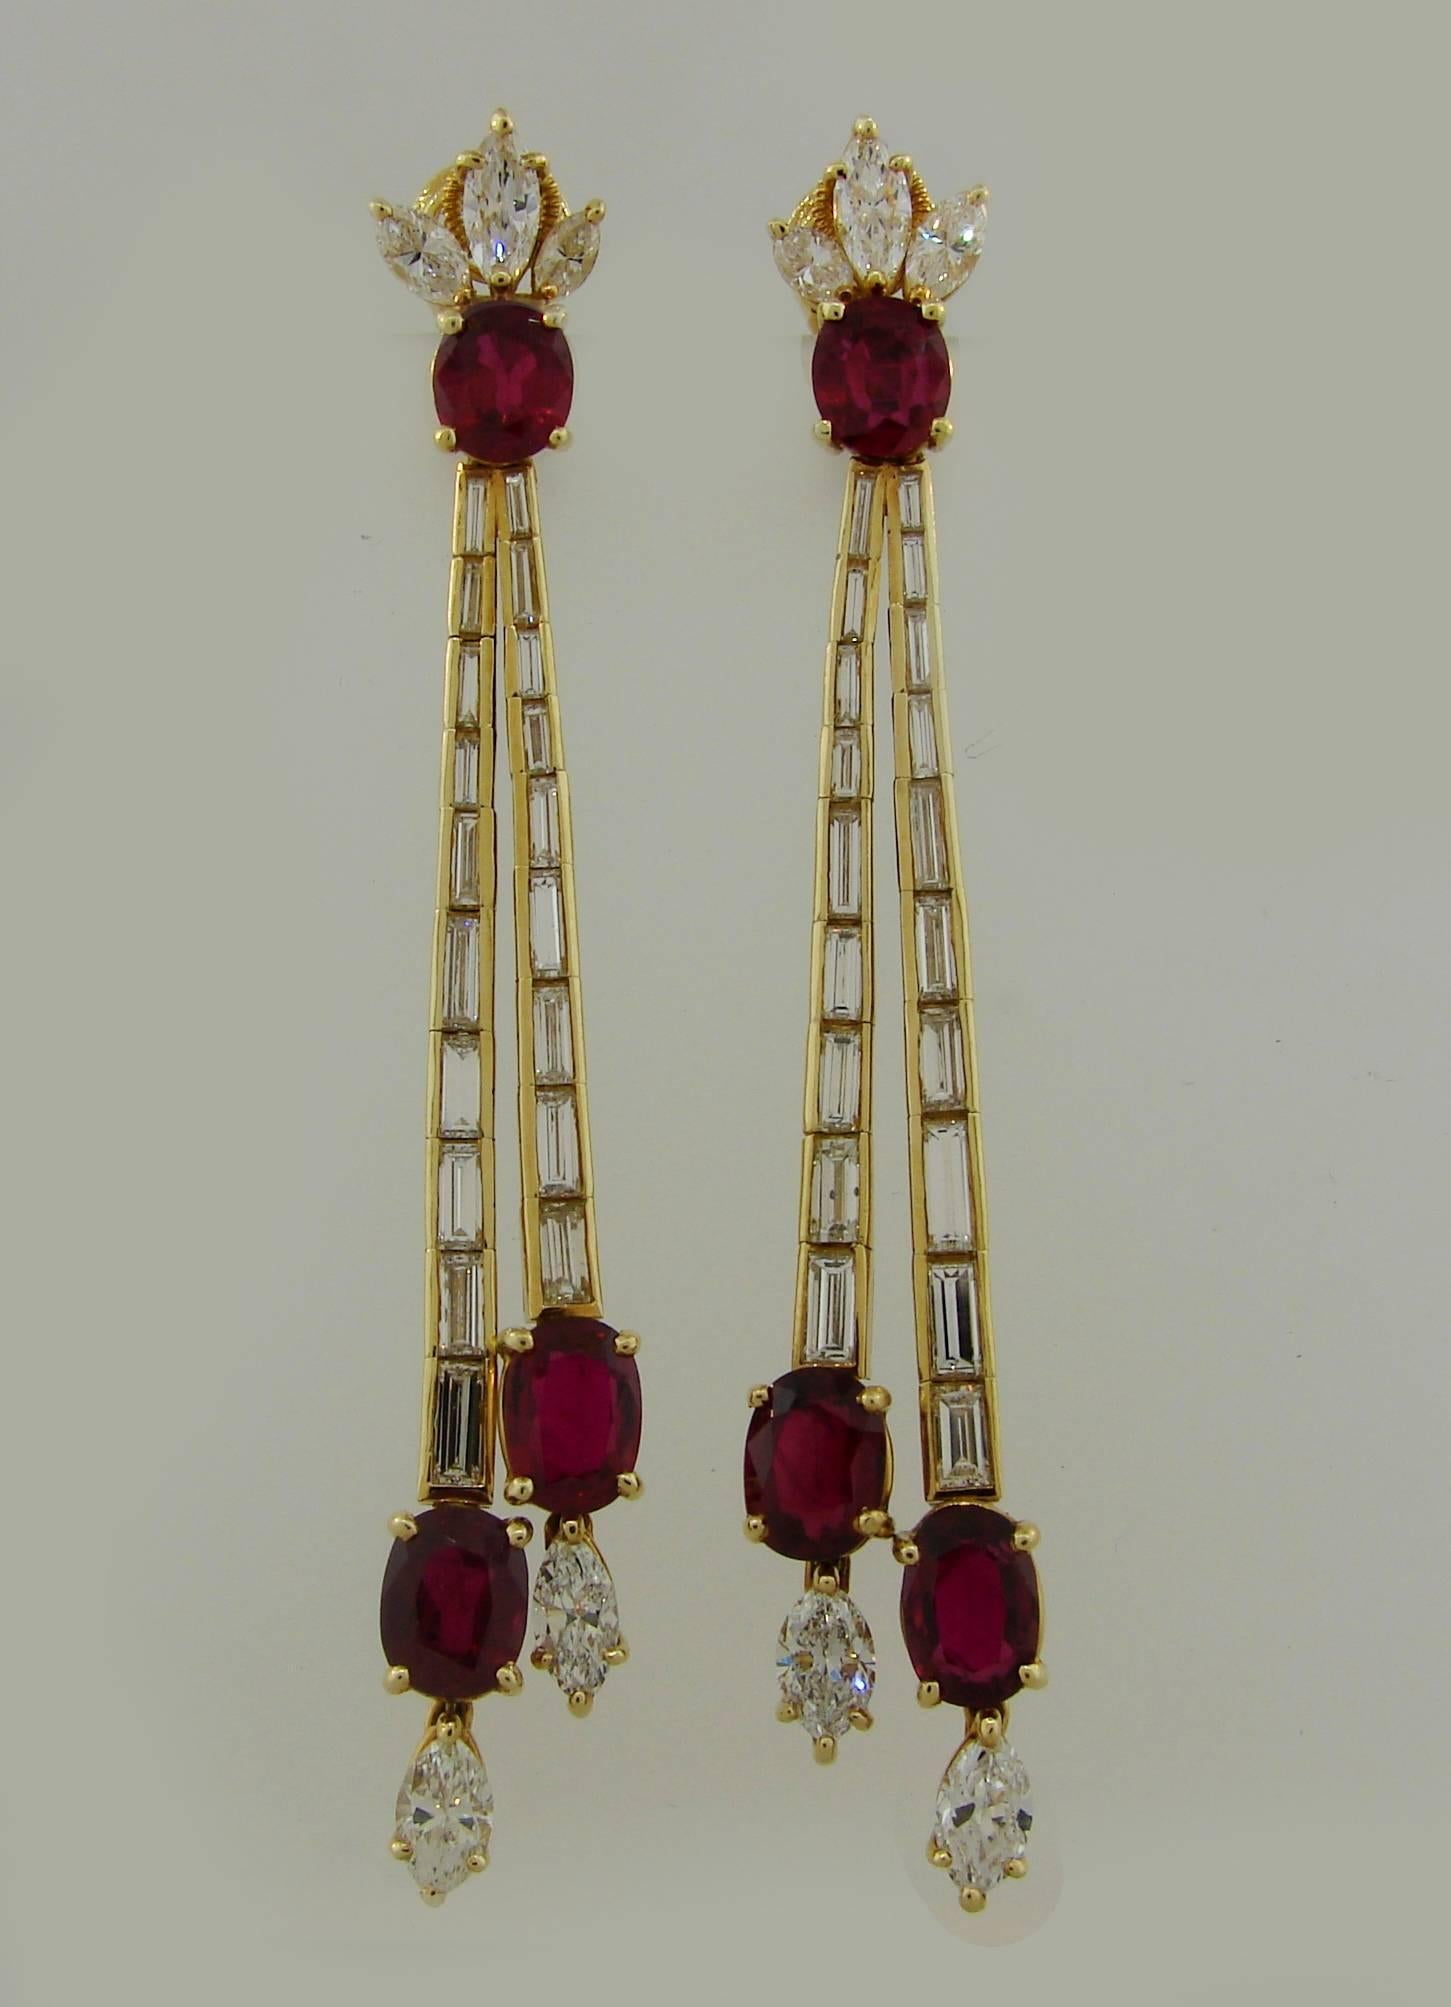 Stunning elegant earrings. Feminine and French chic, they are a great addition to your jewelry collection. 
The earrings are made of 18 karat (stamped) yellow gold, oval faceted ruby and marquise and baguette cut diamonds. Diamond total weight 